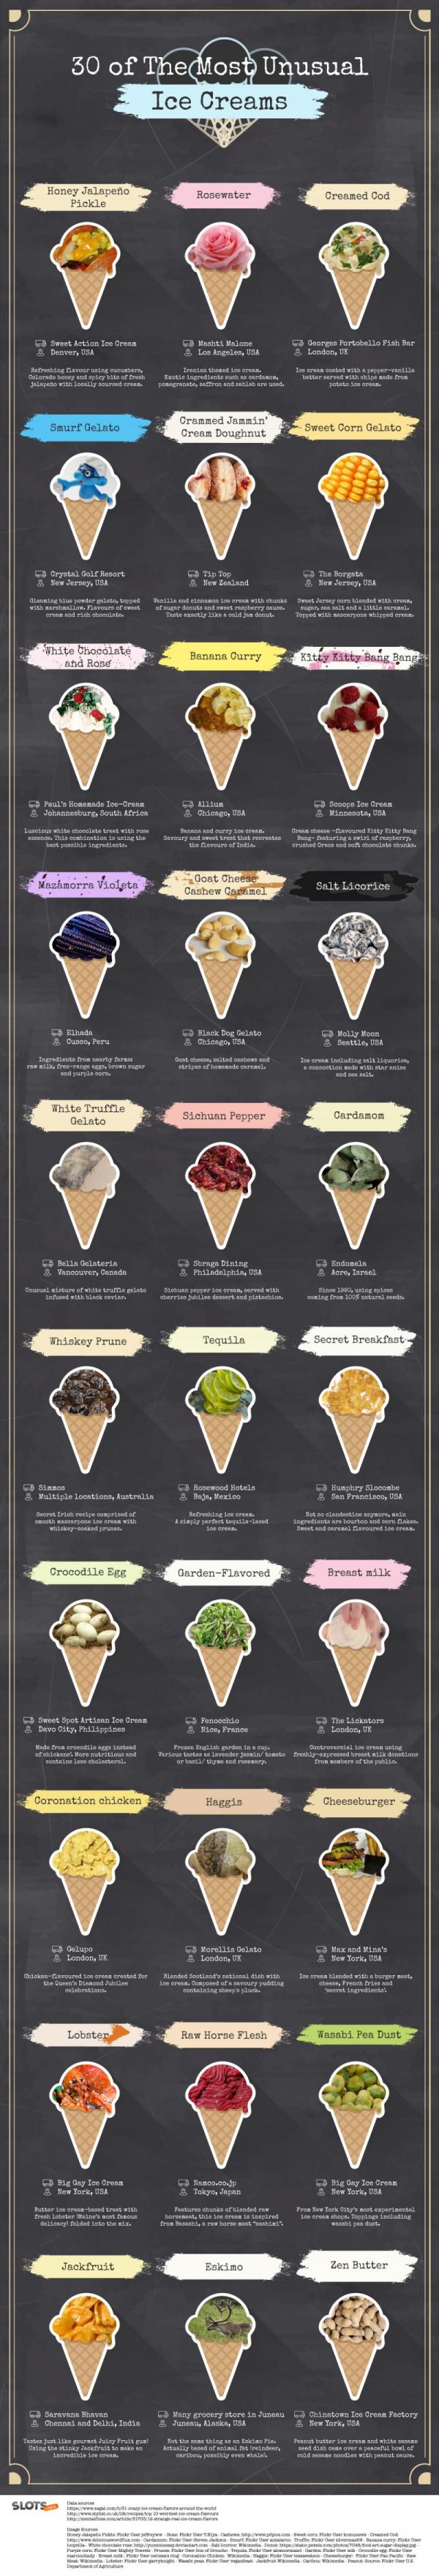 30 of The Most Unusual Ice Creams [Infographic]